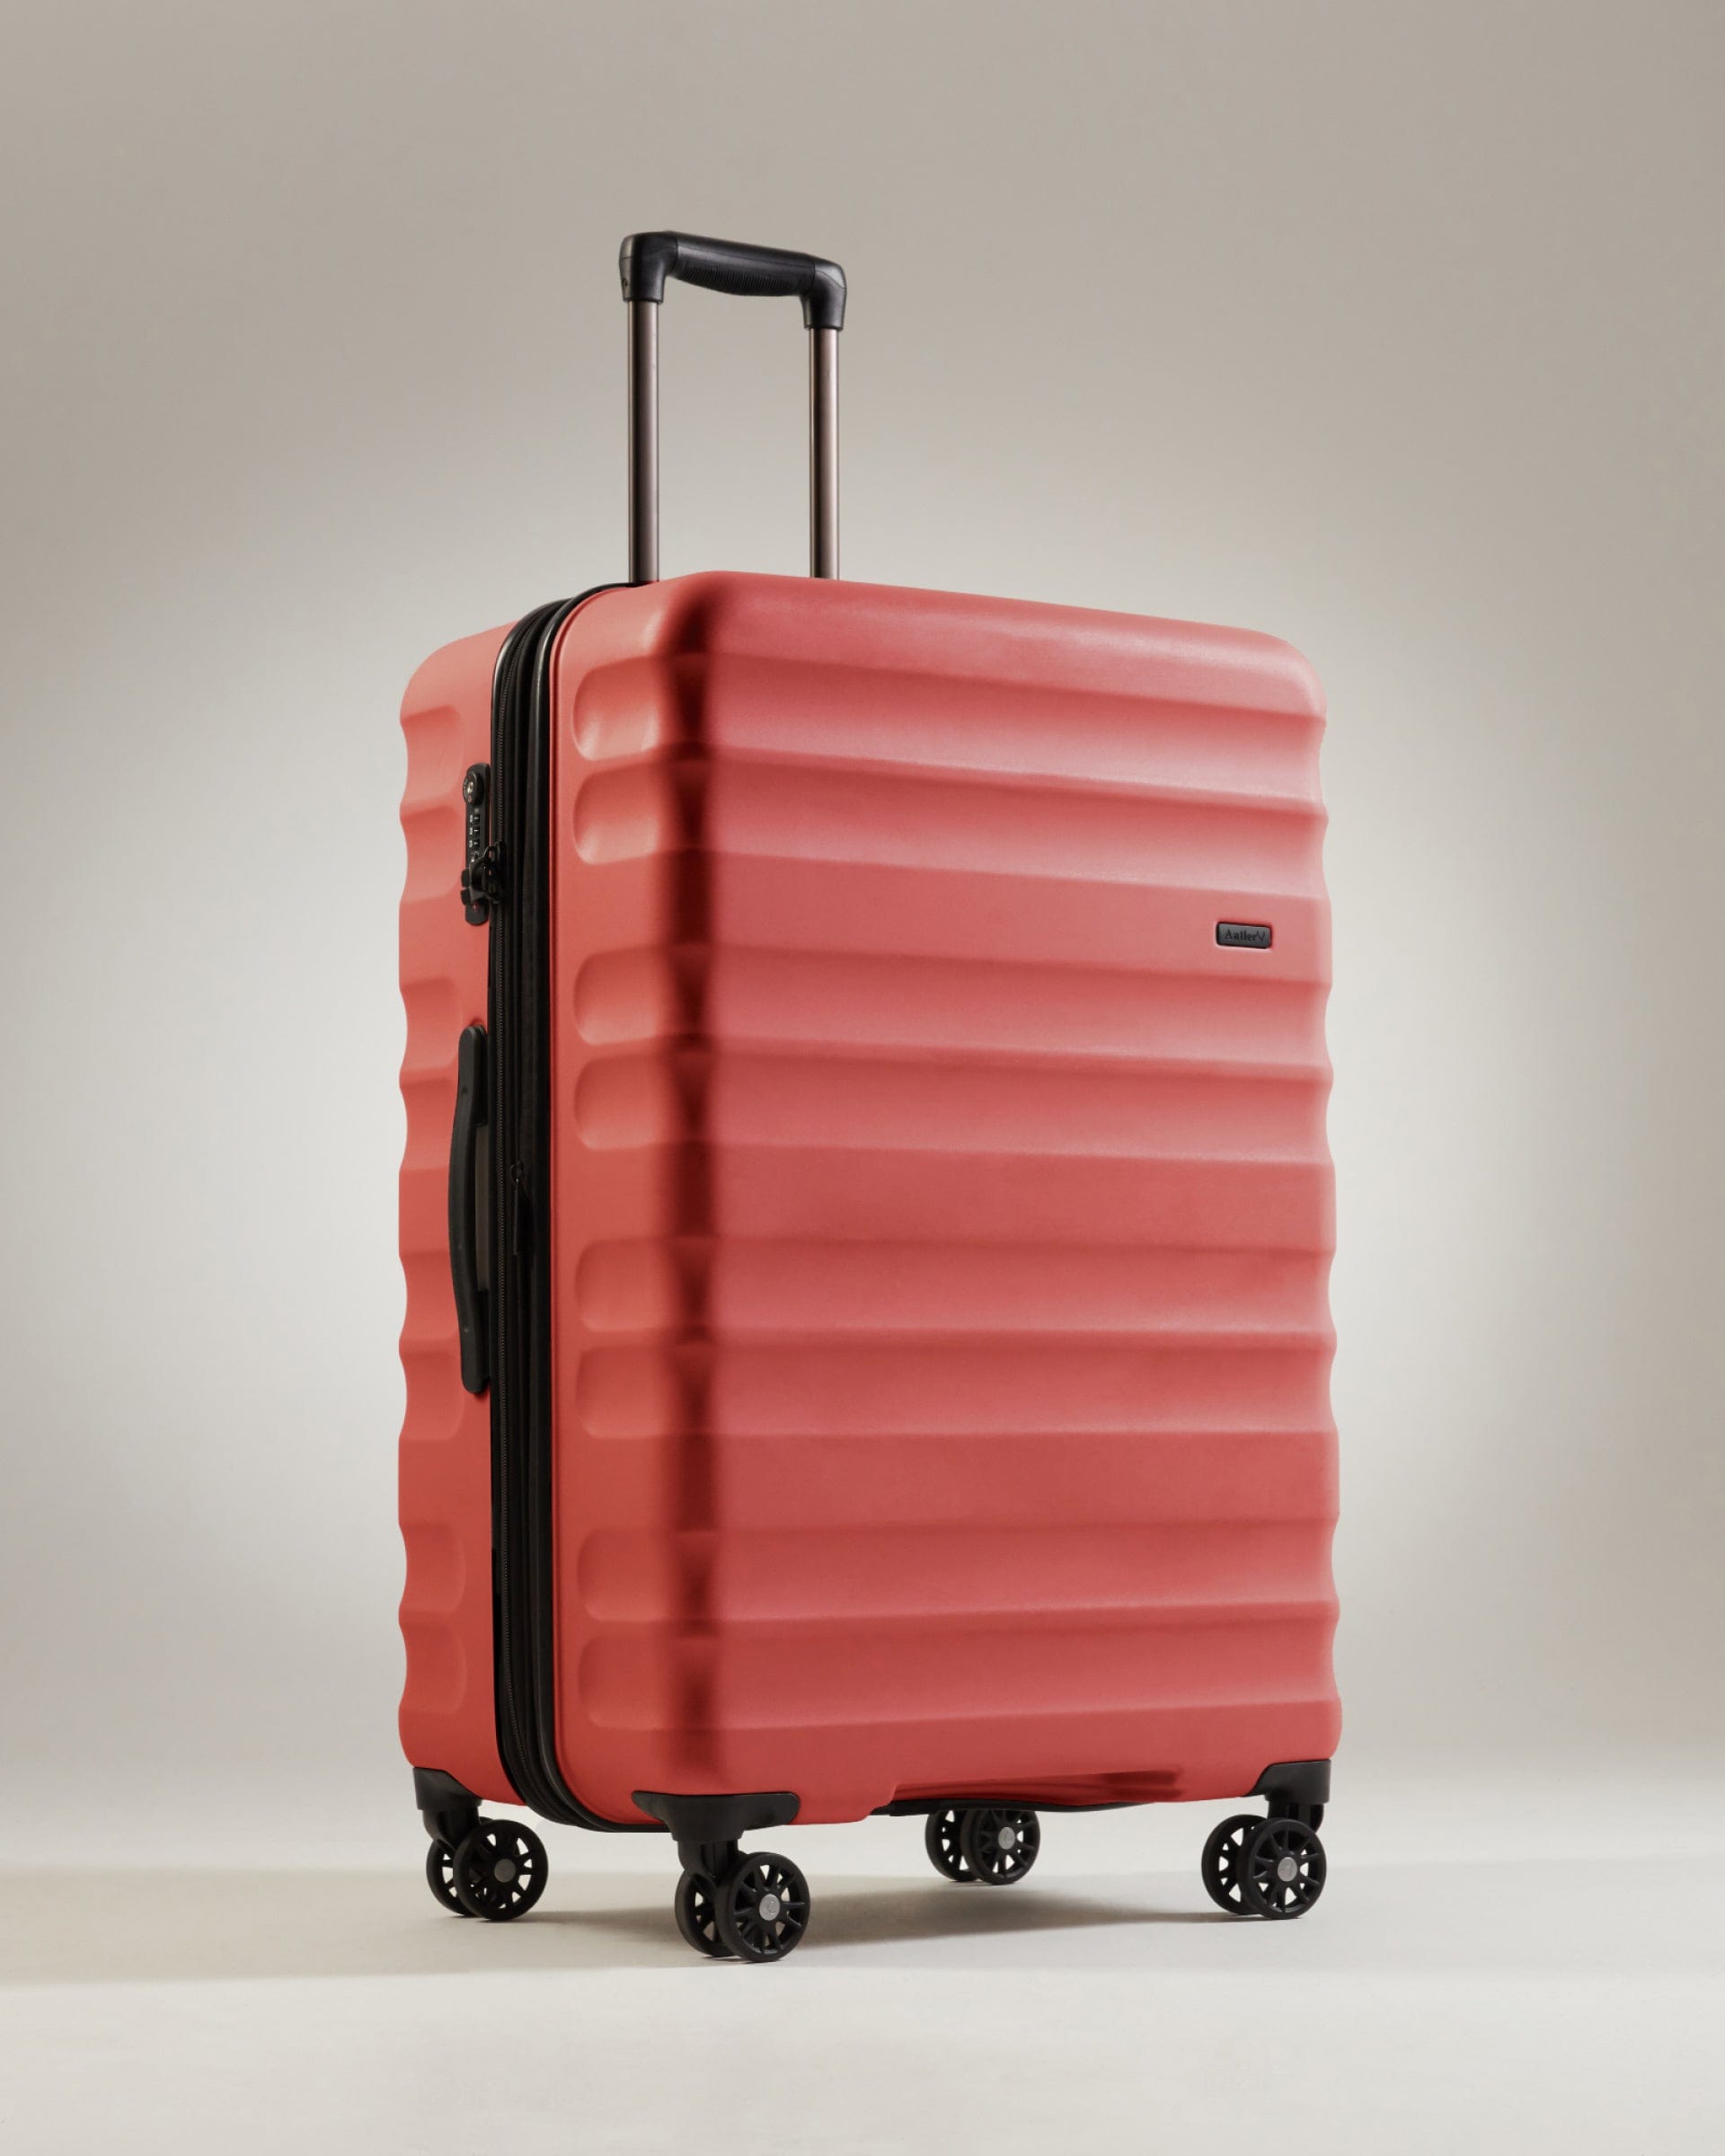 View Antler Clifton Large Suitcase In Poppy Size 35 x 52 x 80 cm information